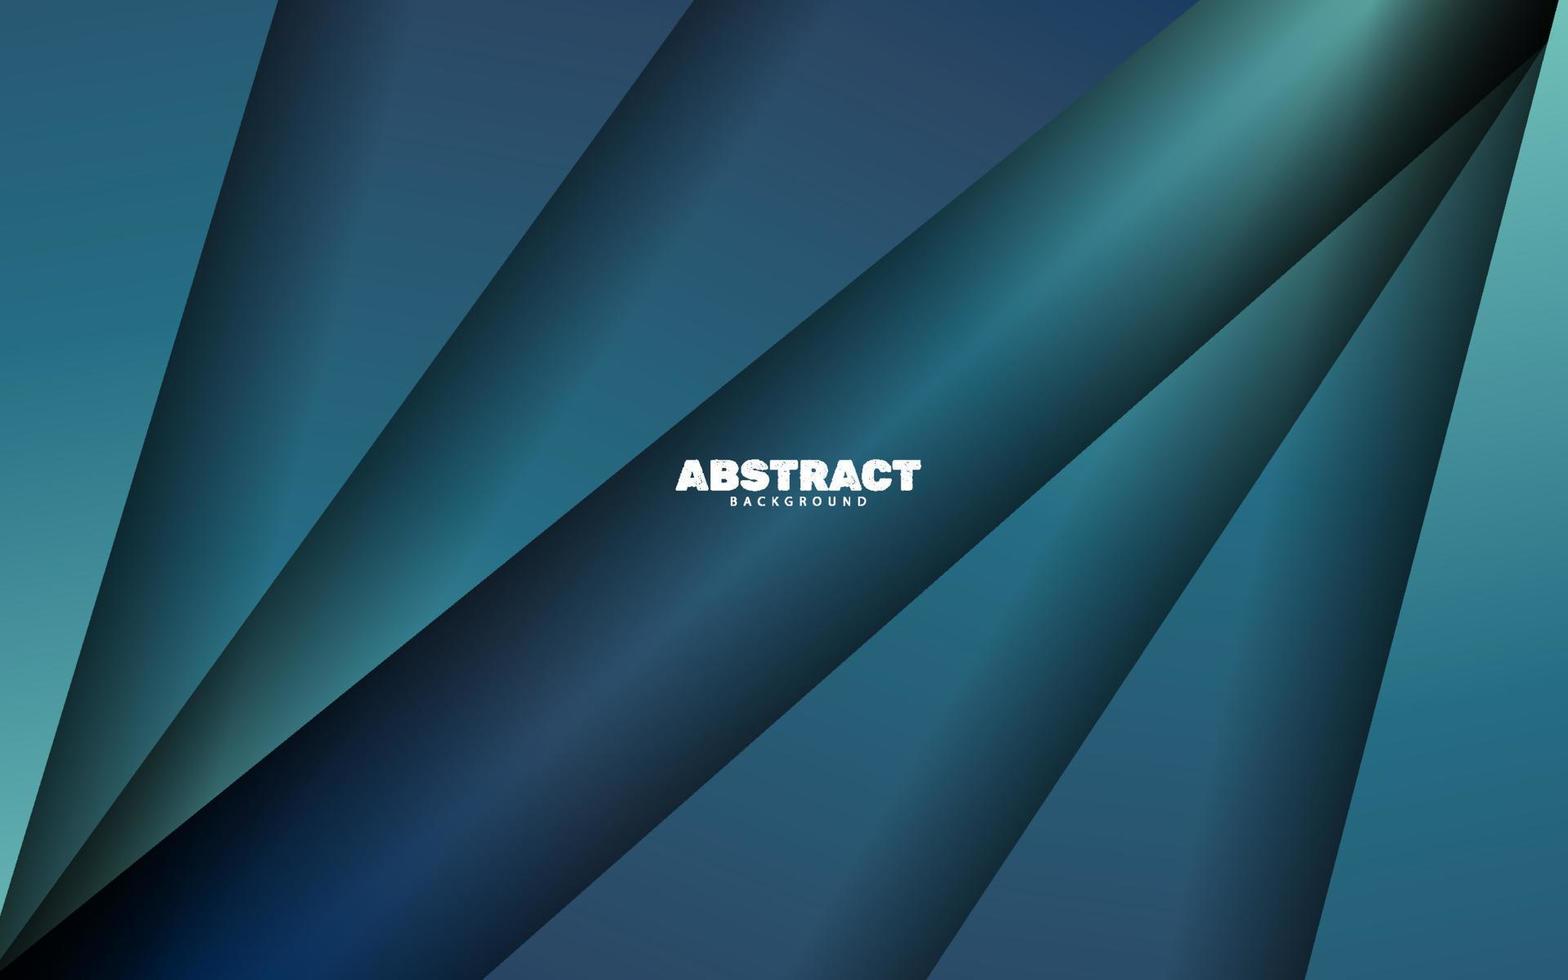 Abstract overlap layer papercut blue color background vector